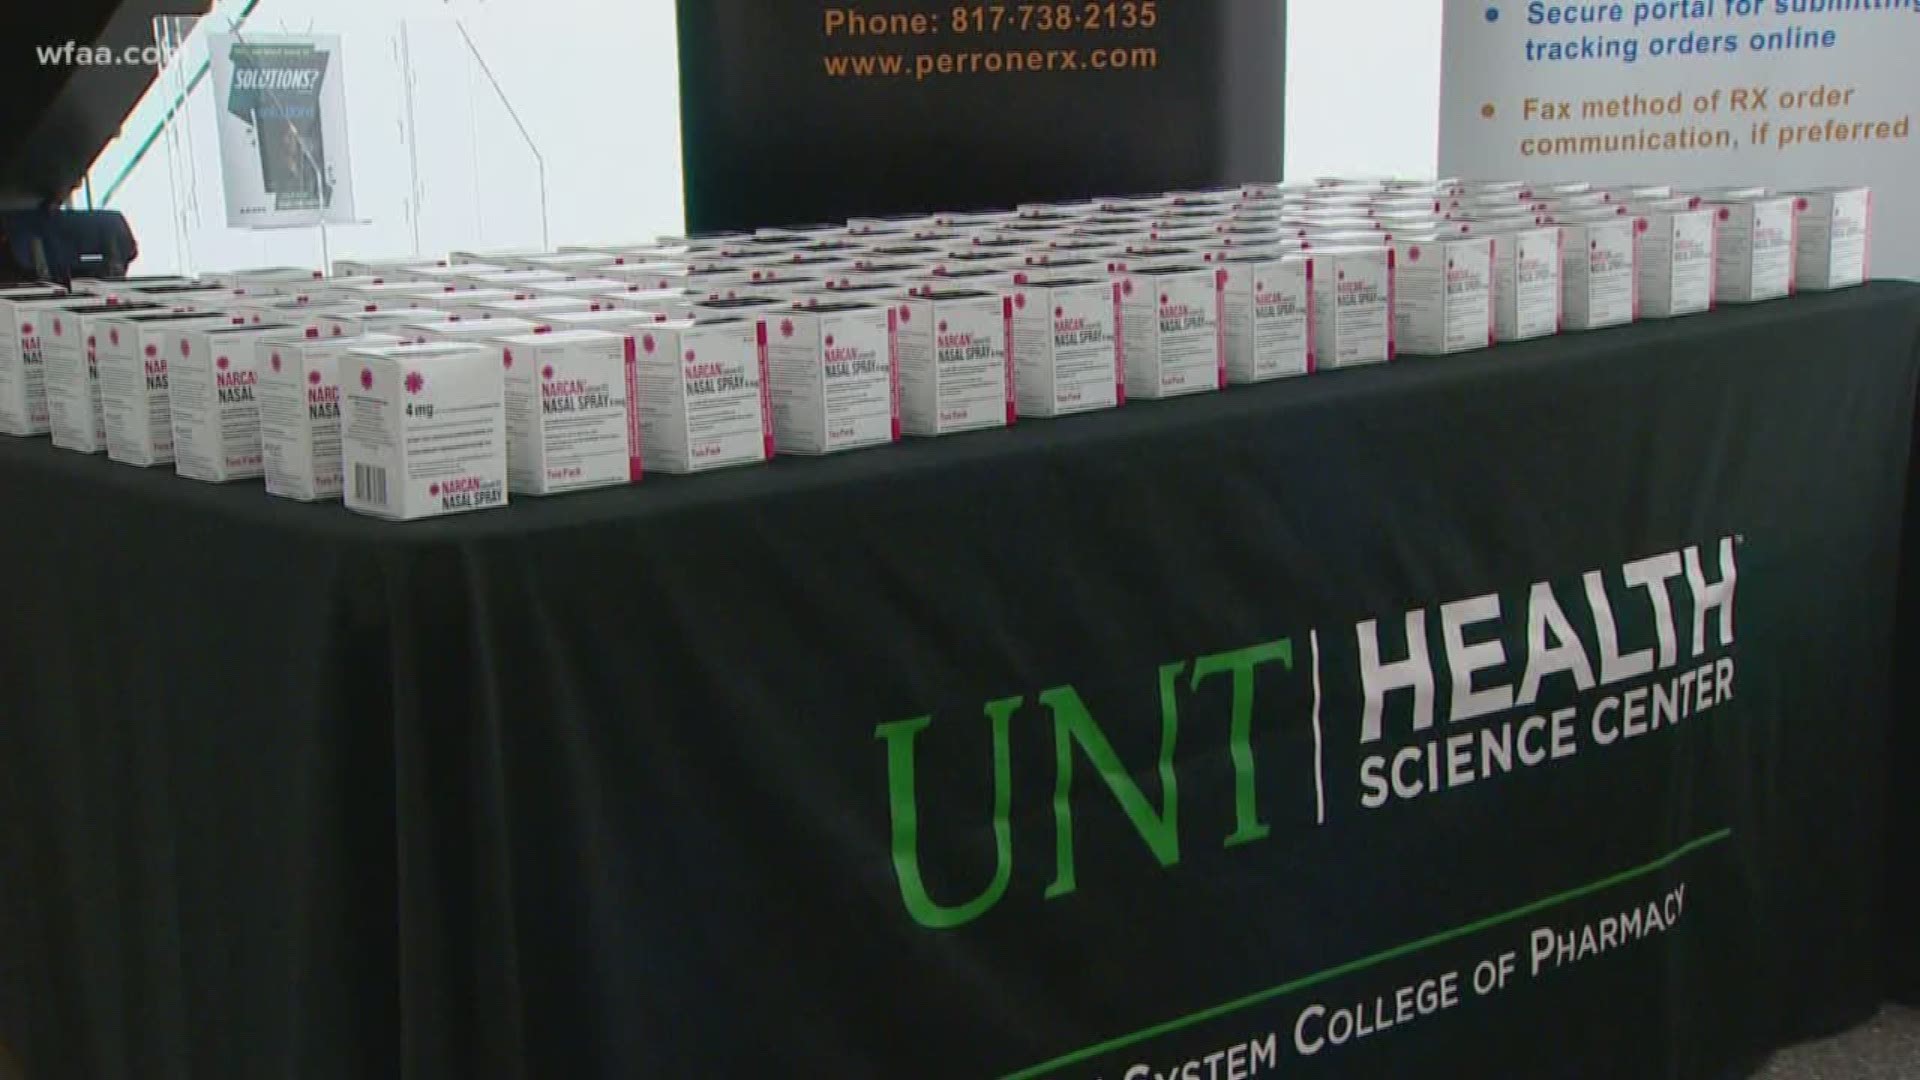 The UNT Health Science Center is arming staff and students with thousands of does of Narcan and training on how to administer the overdose reversal drug.